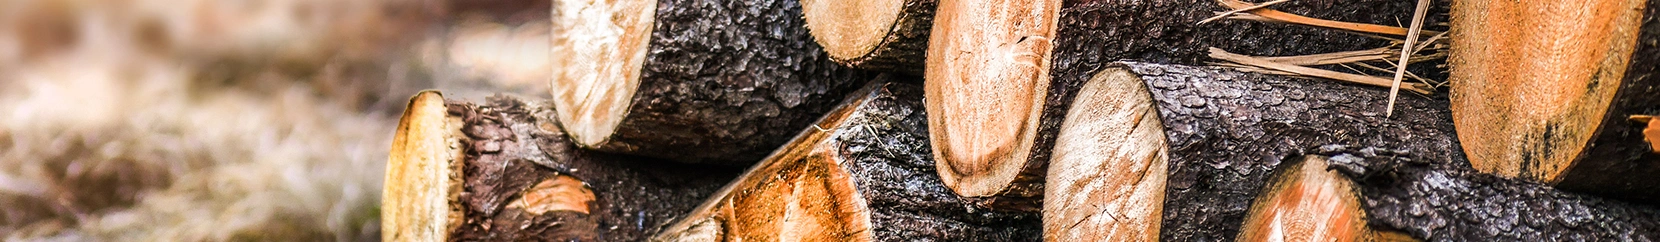 A close up photo of some logs.